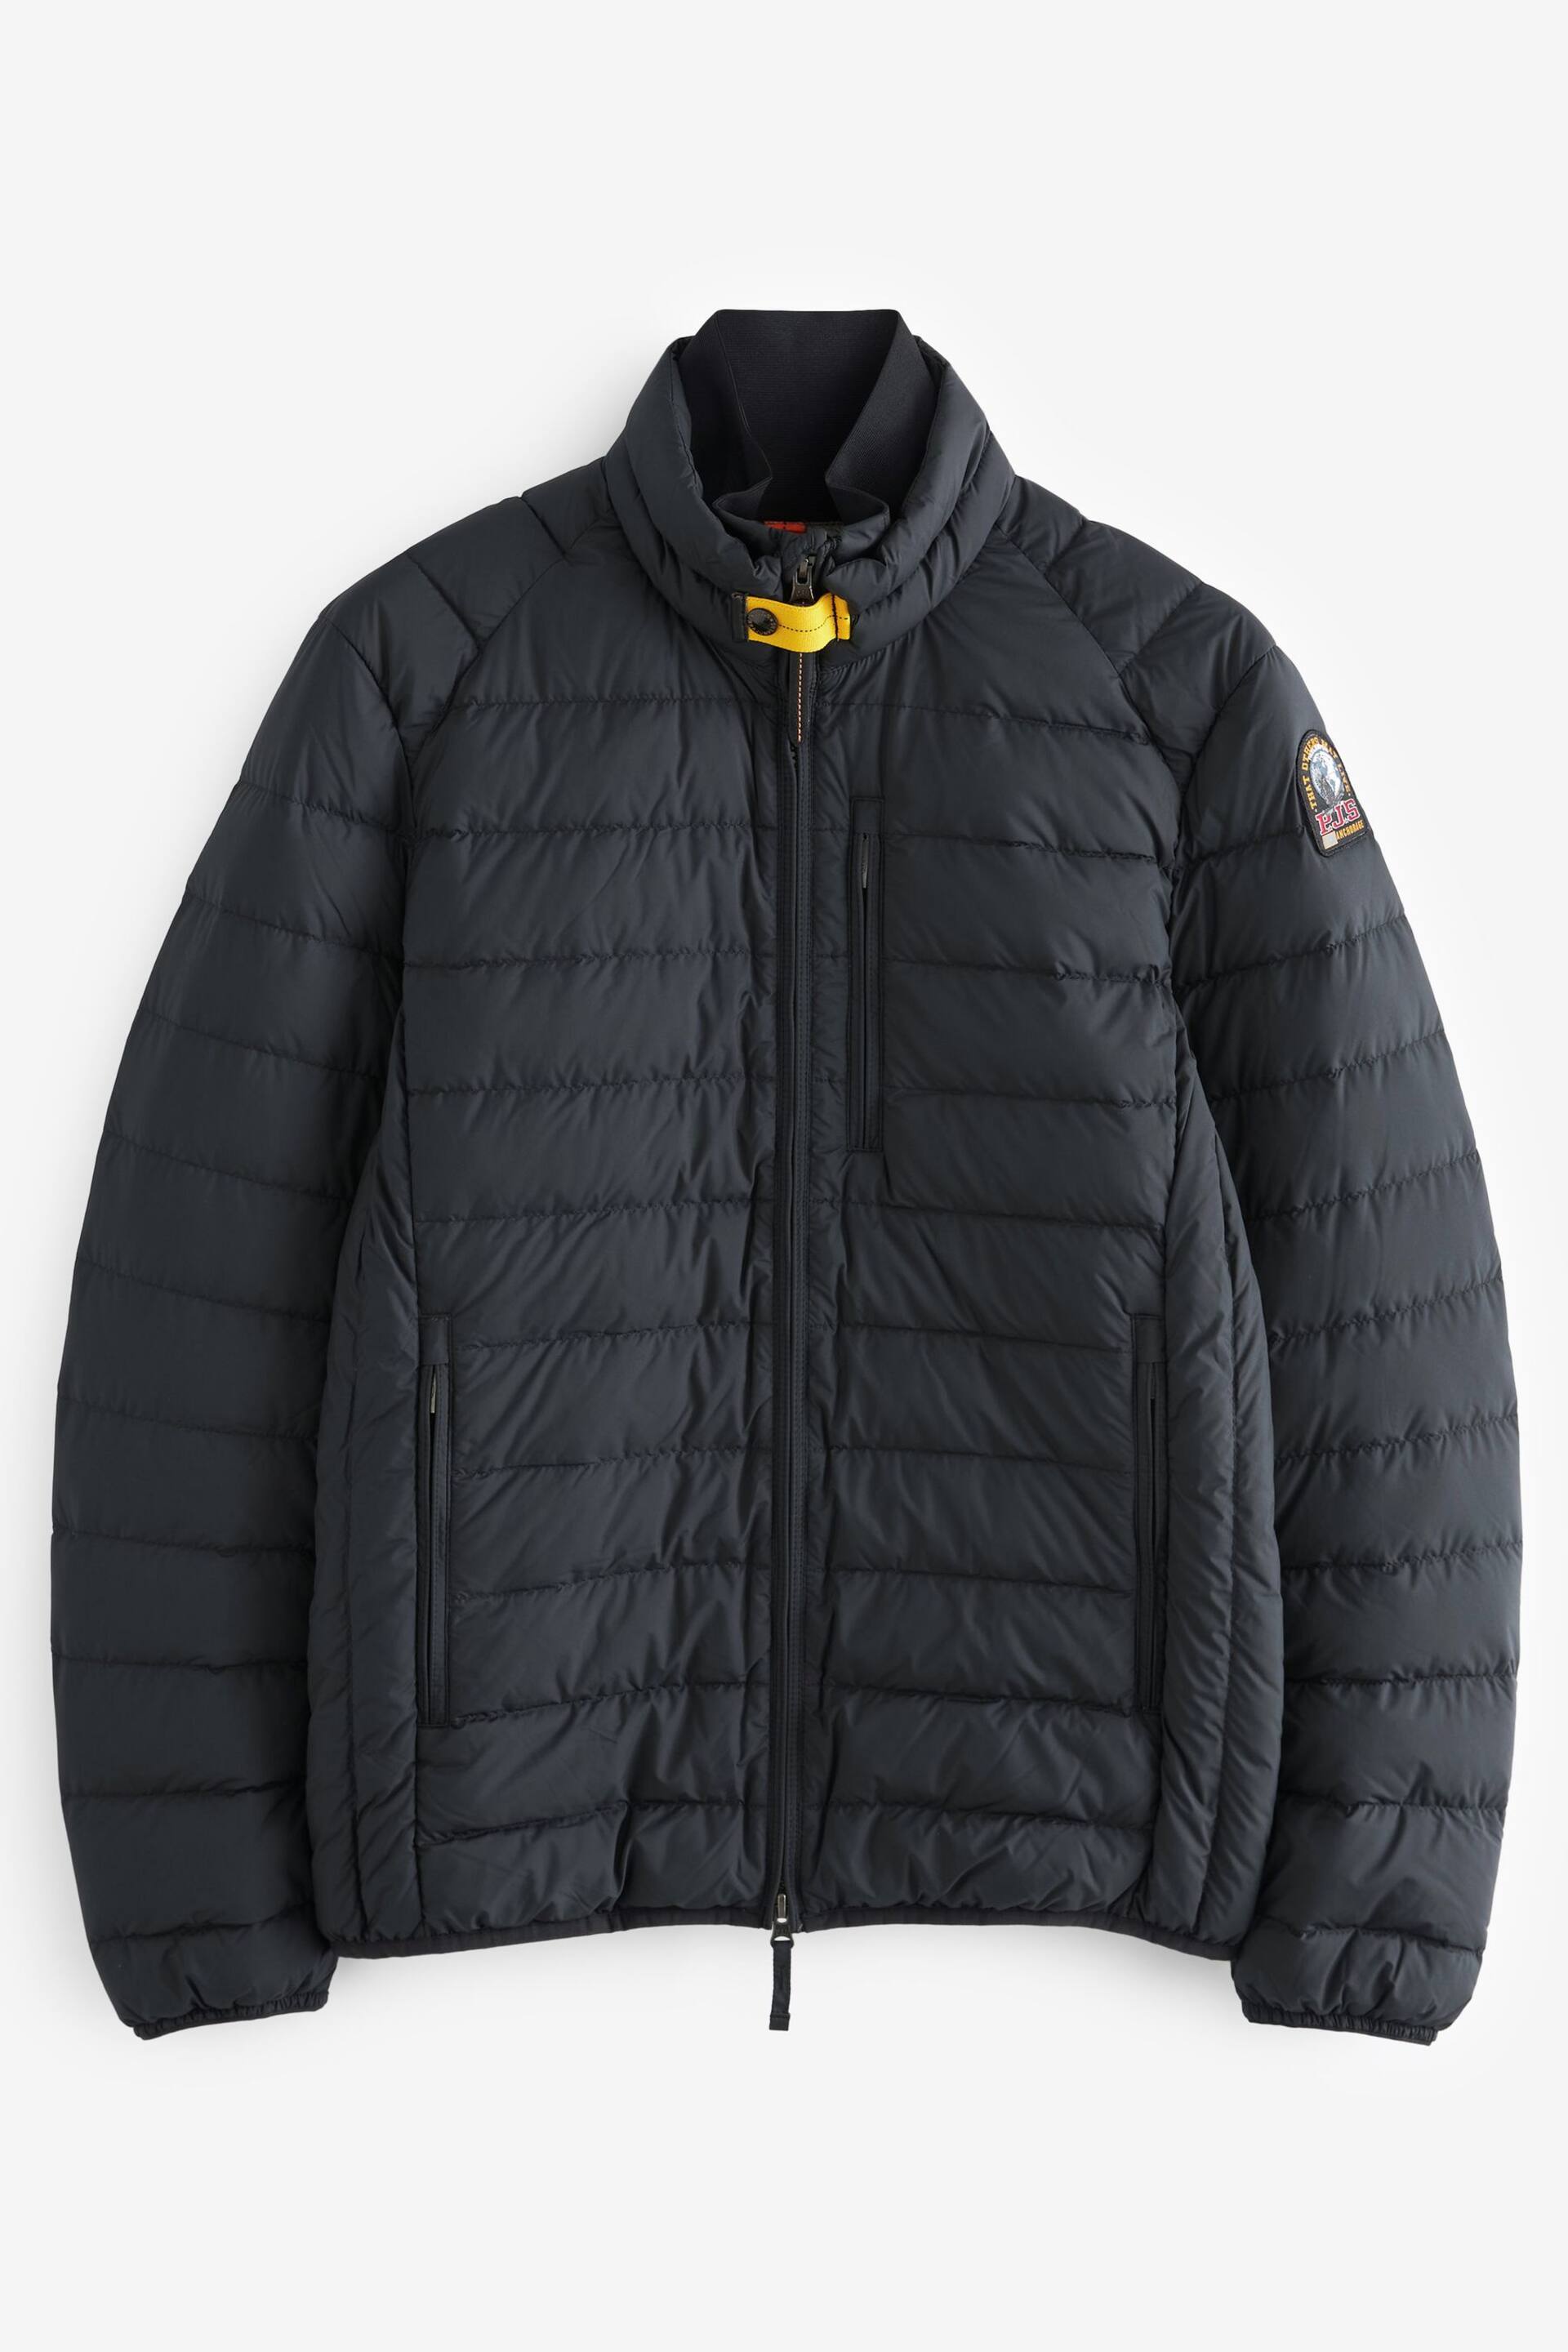 Parajumpers Ugo Lightweight Padded Down Jacket - Image 1 of 3